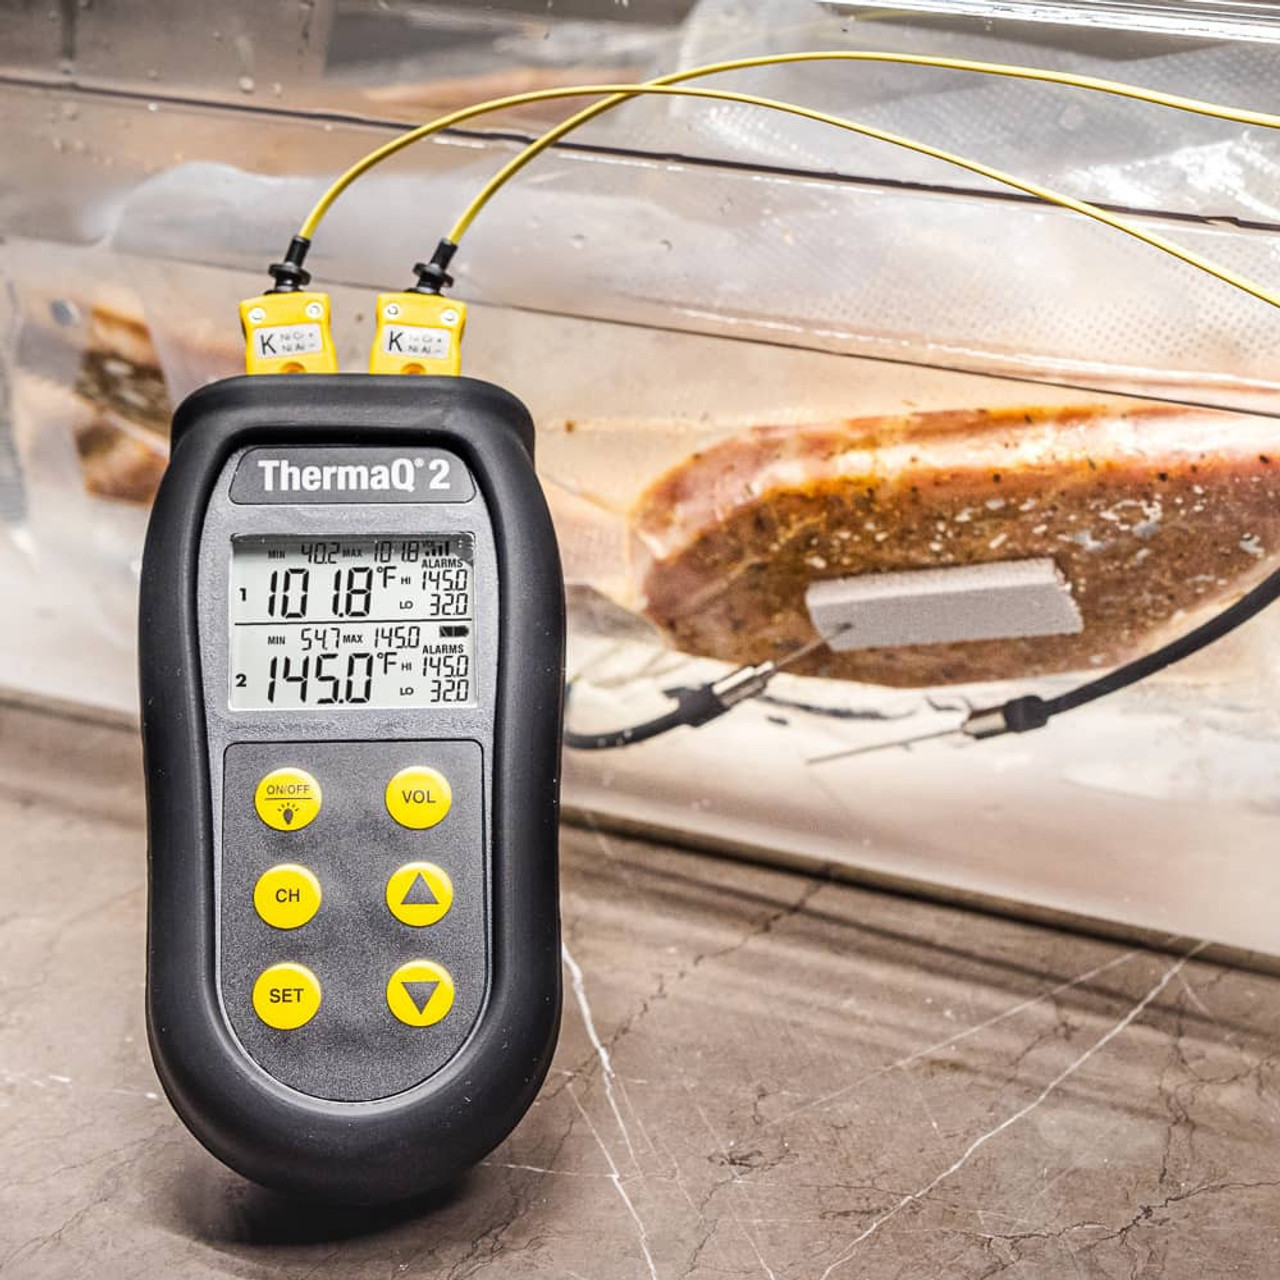 herstel Berouw Vertrouwen op ThermaQ 2 Sous Vide Kit | ThermoWorks